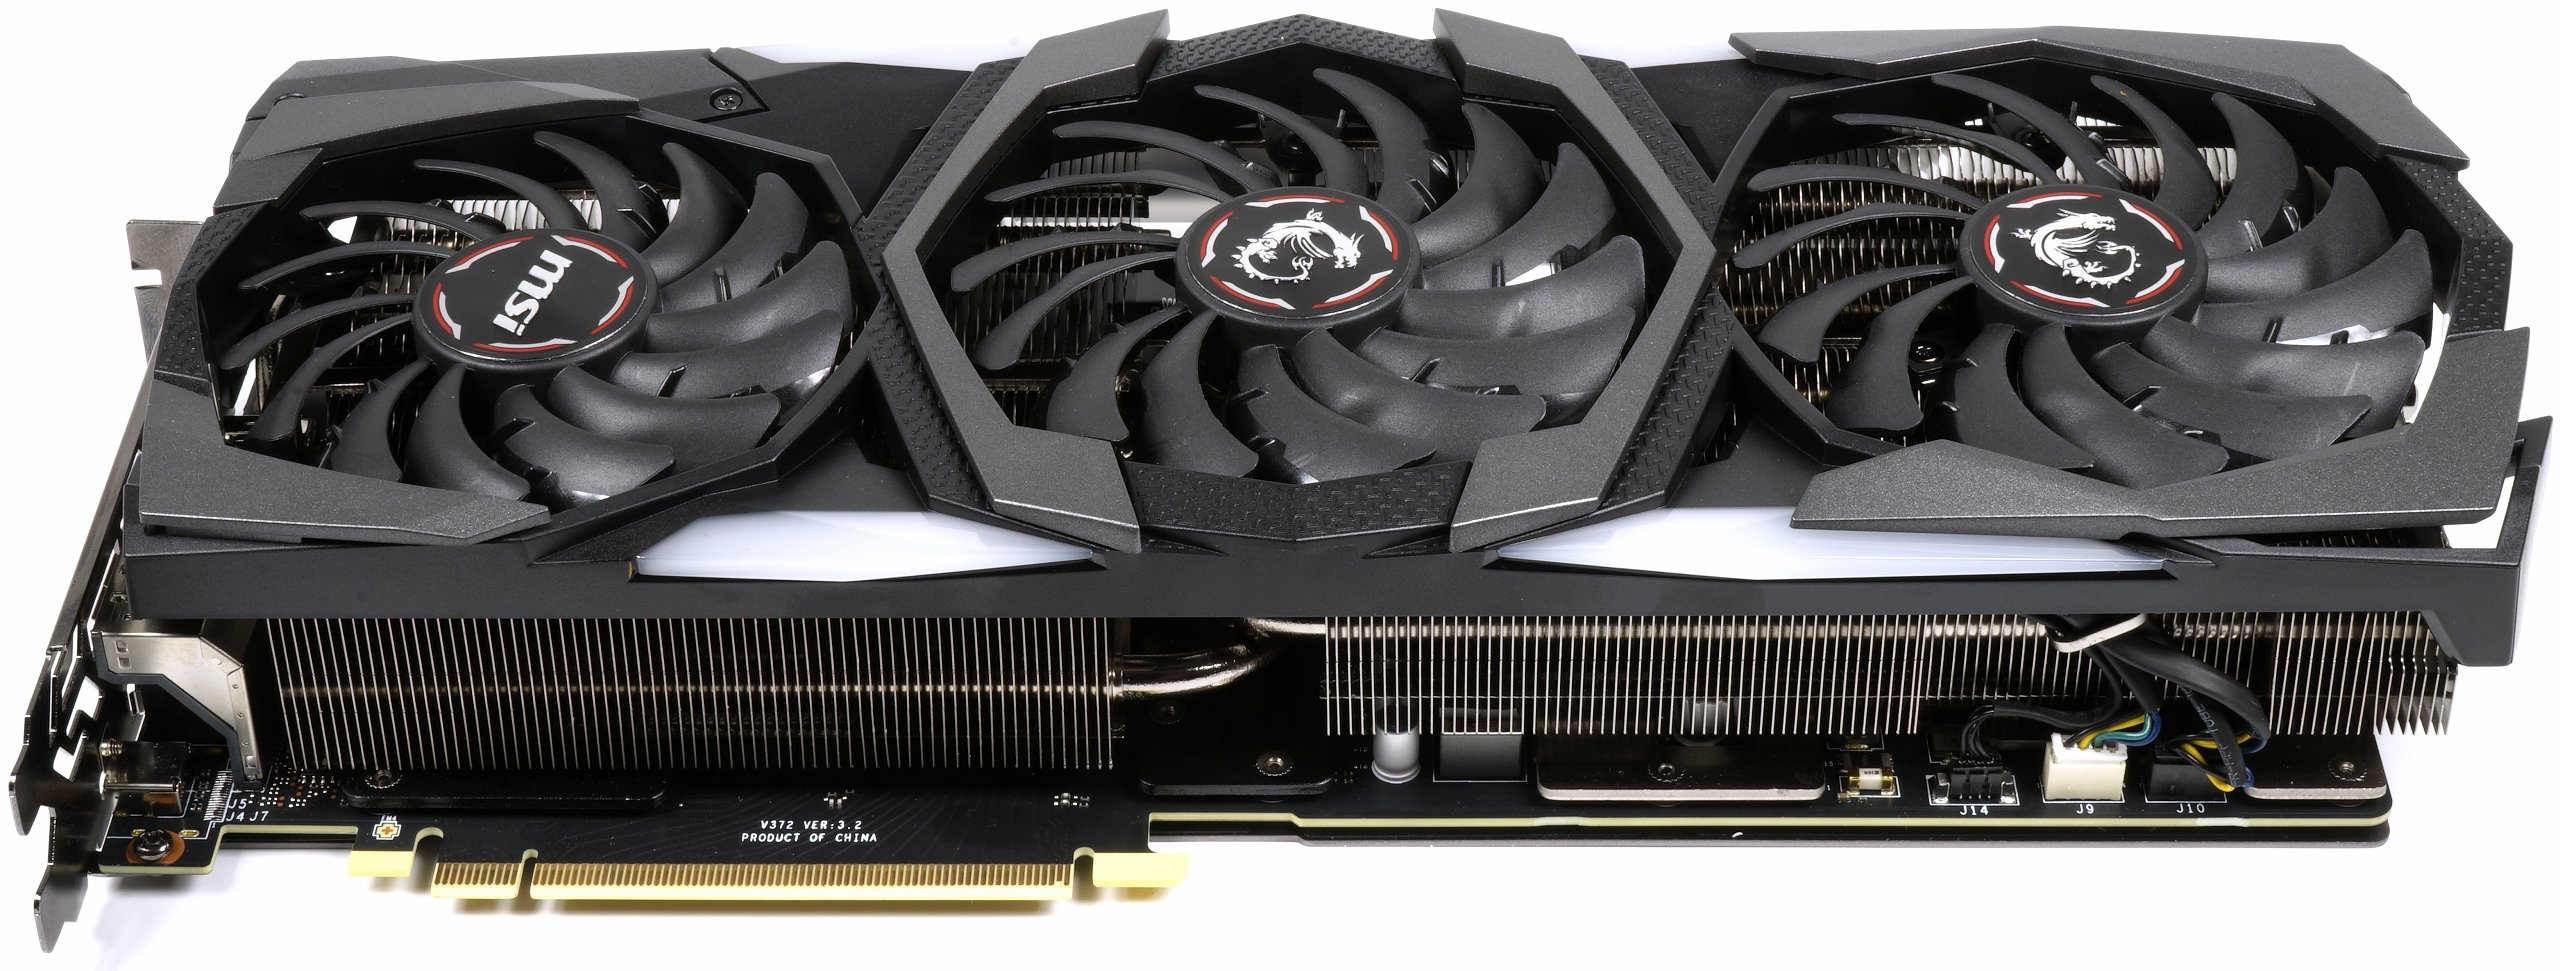 MSI GeForce RTX 2080 Gaming X Trio review - Quiet, fast, colorful